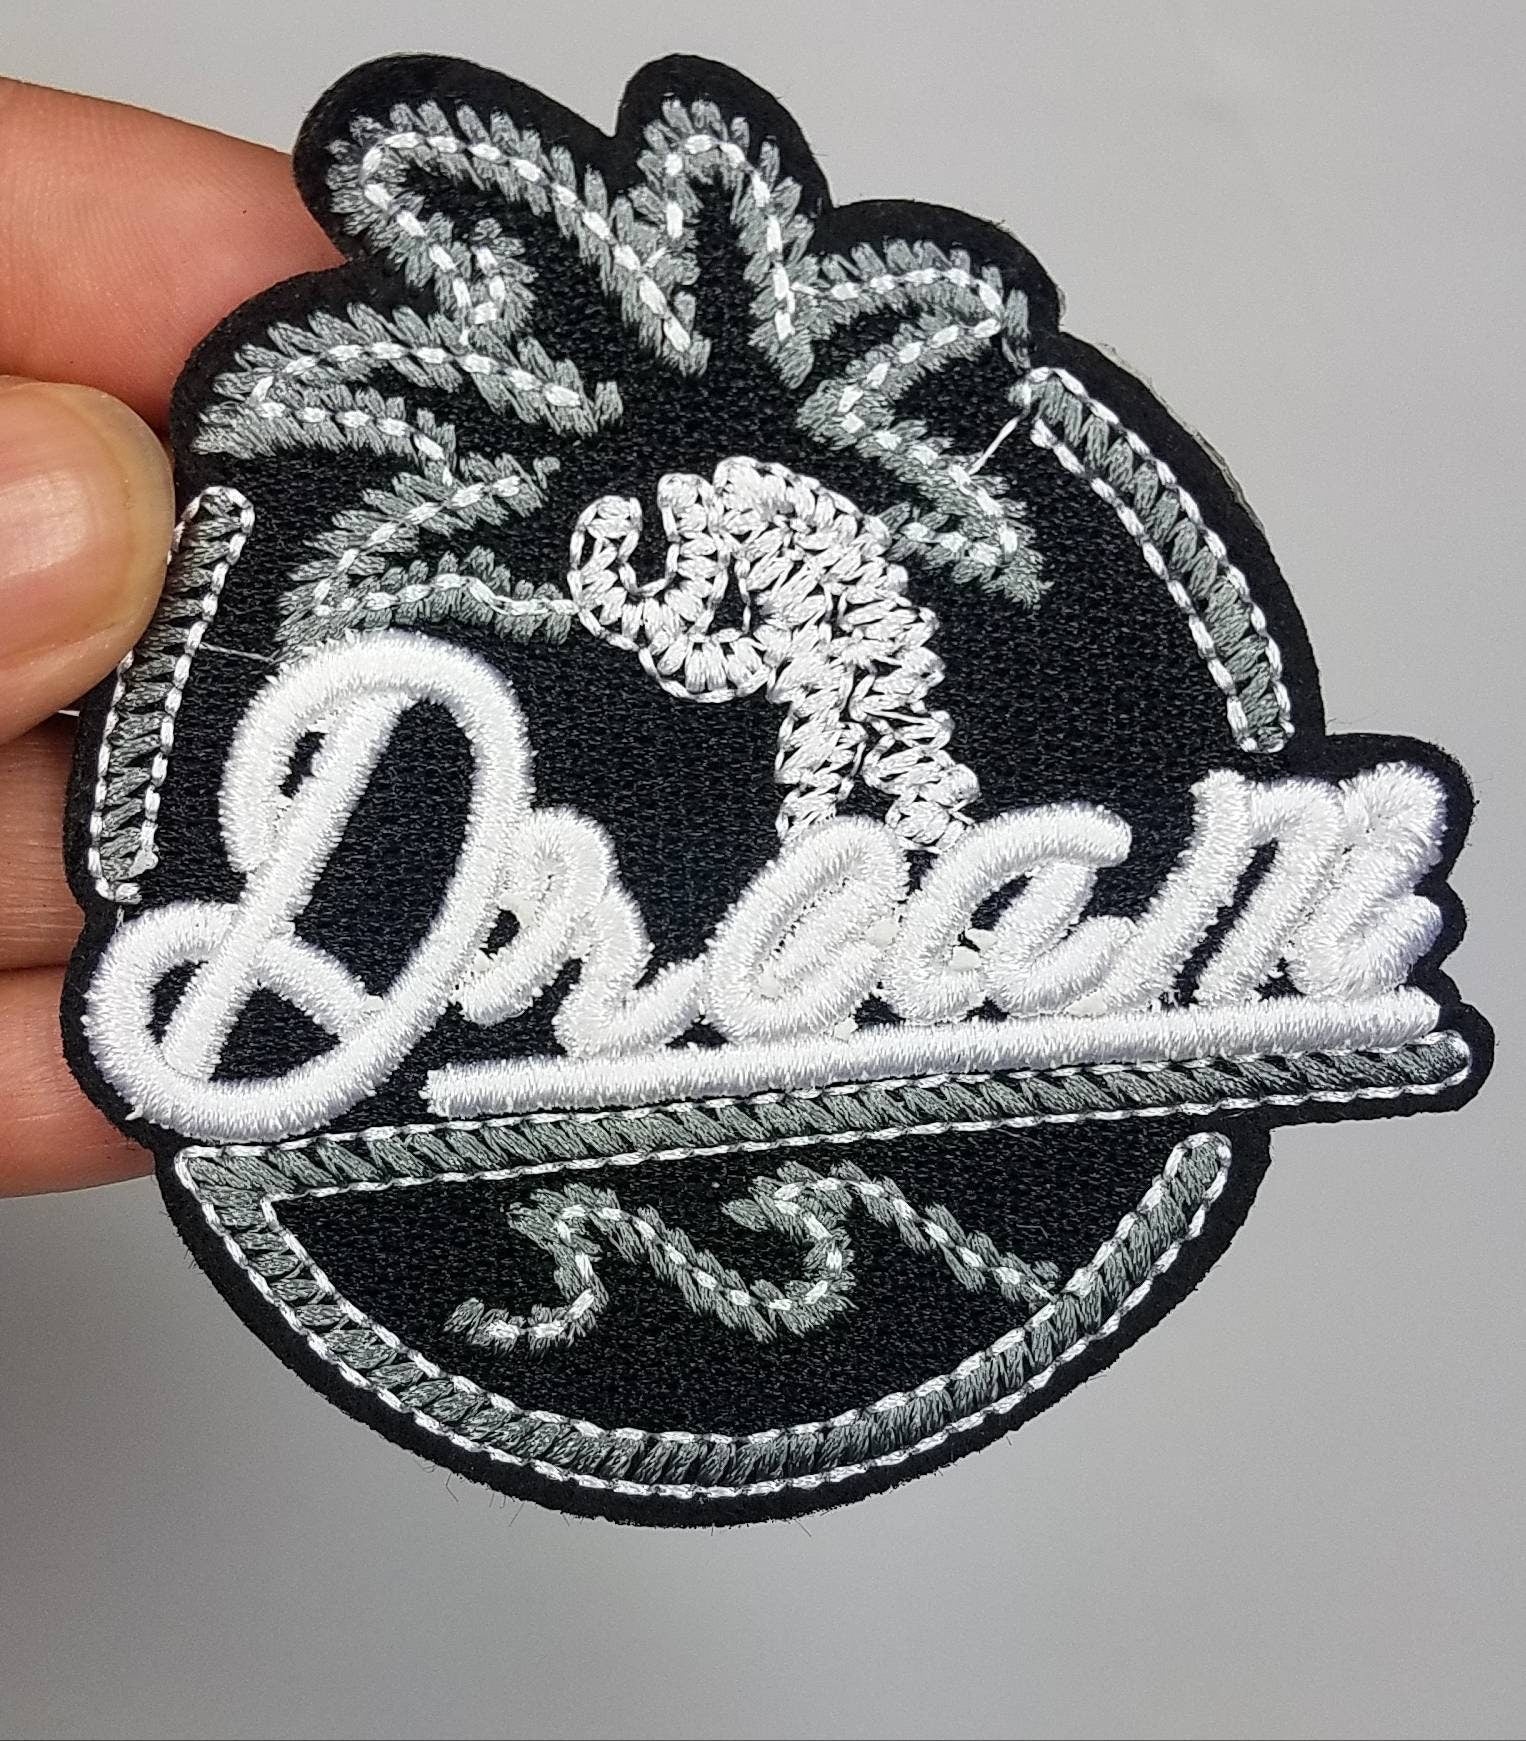 Black, Grey, & White "Palm Tree Dream" Iron on  Embroidered Patch, Statement Applique, Cool patch for clothing, 3-inch x 3-inch badge